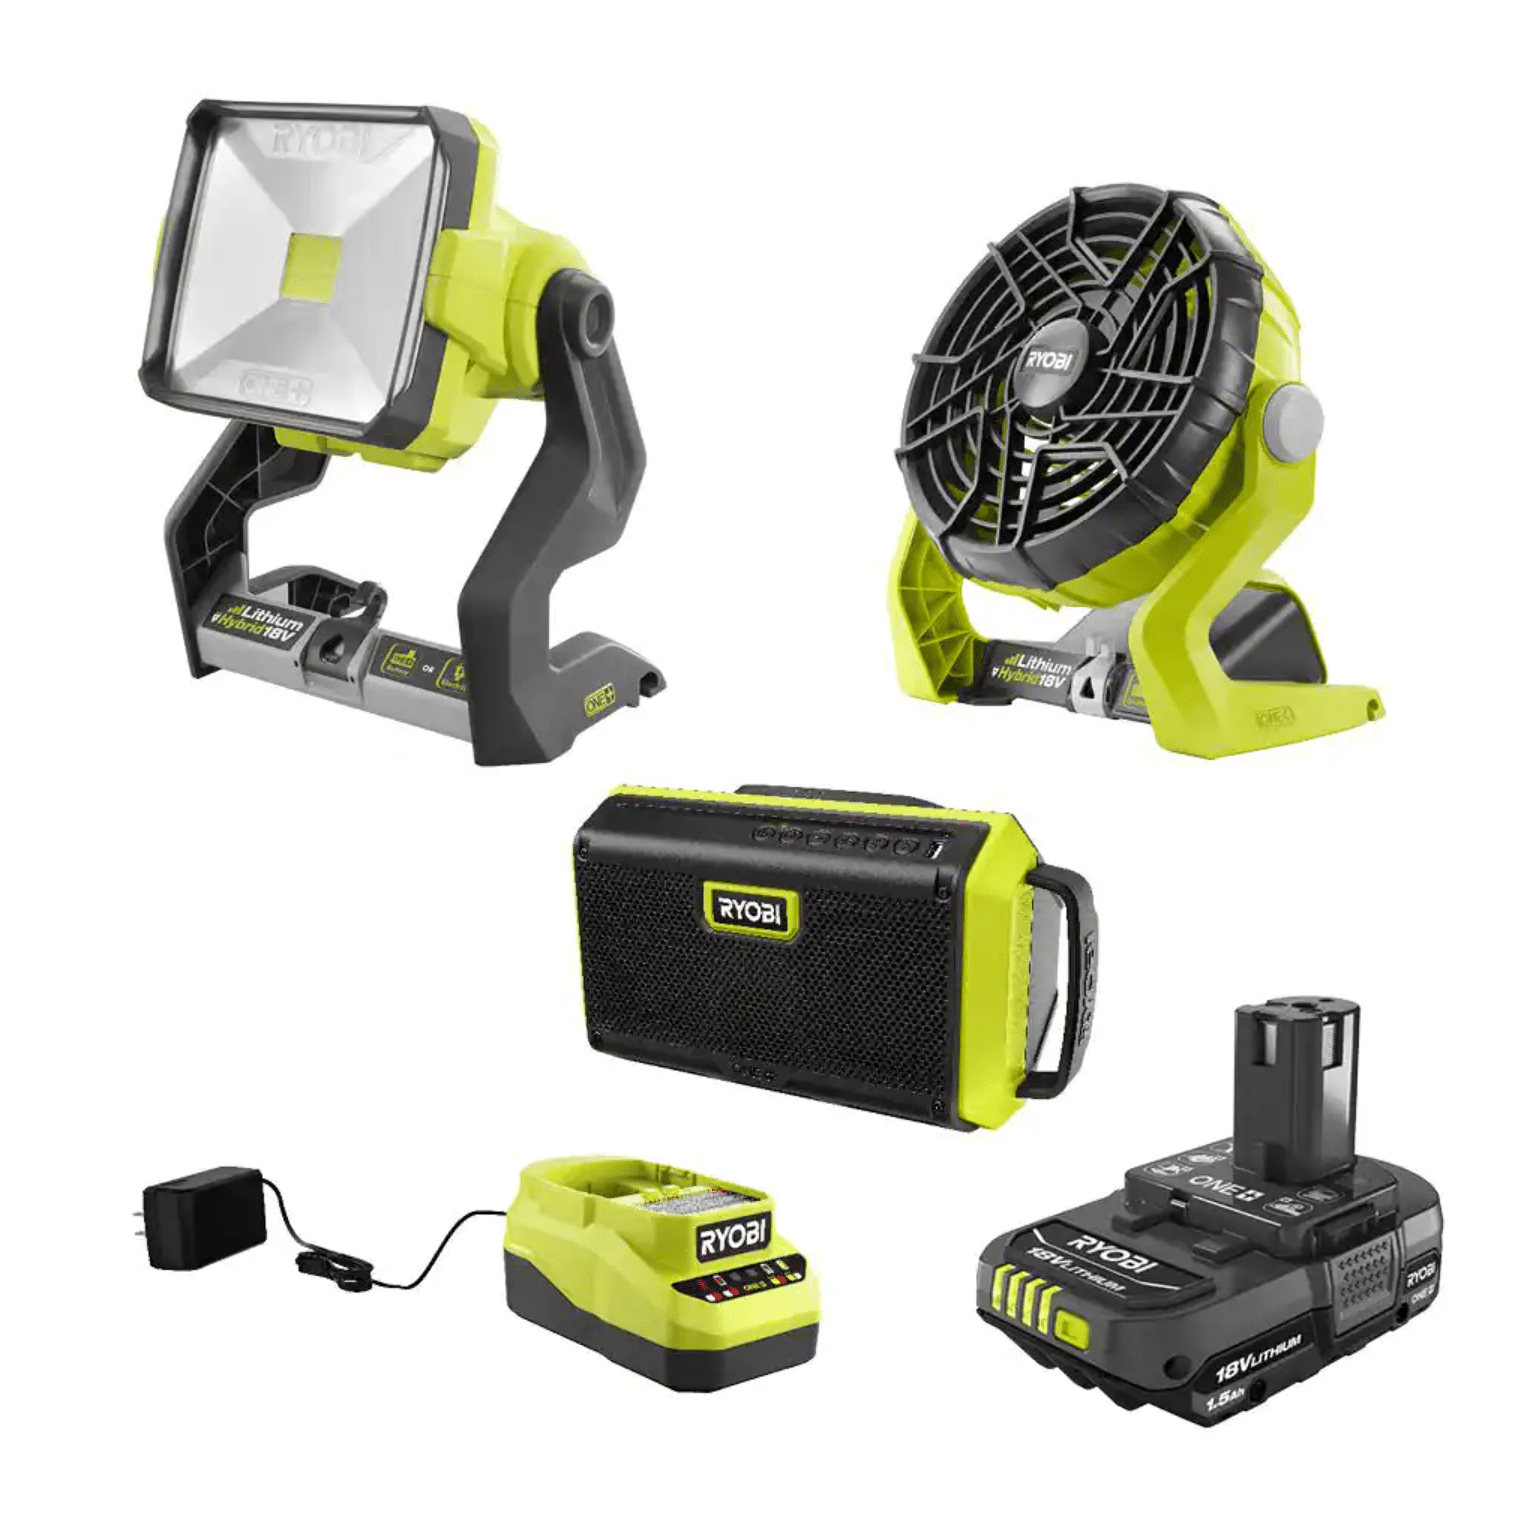 Ryobi One+ 18V Cordless 3-Tool Campers Combo Kit with Work Light, Speaker, Fan, 1.5 Ah Battery & Charger (PCL1304K1N)